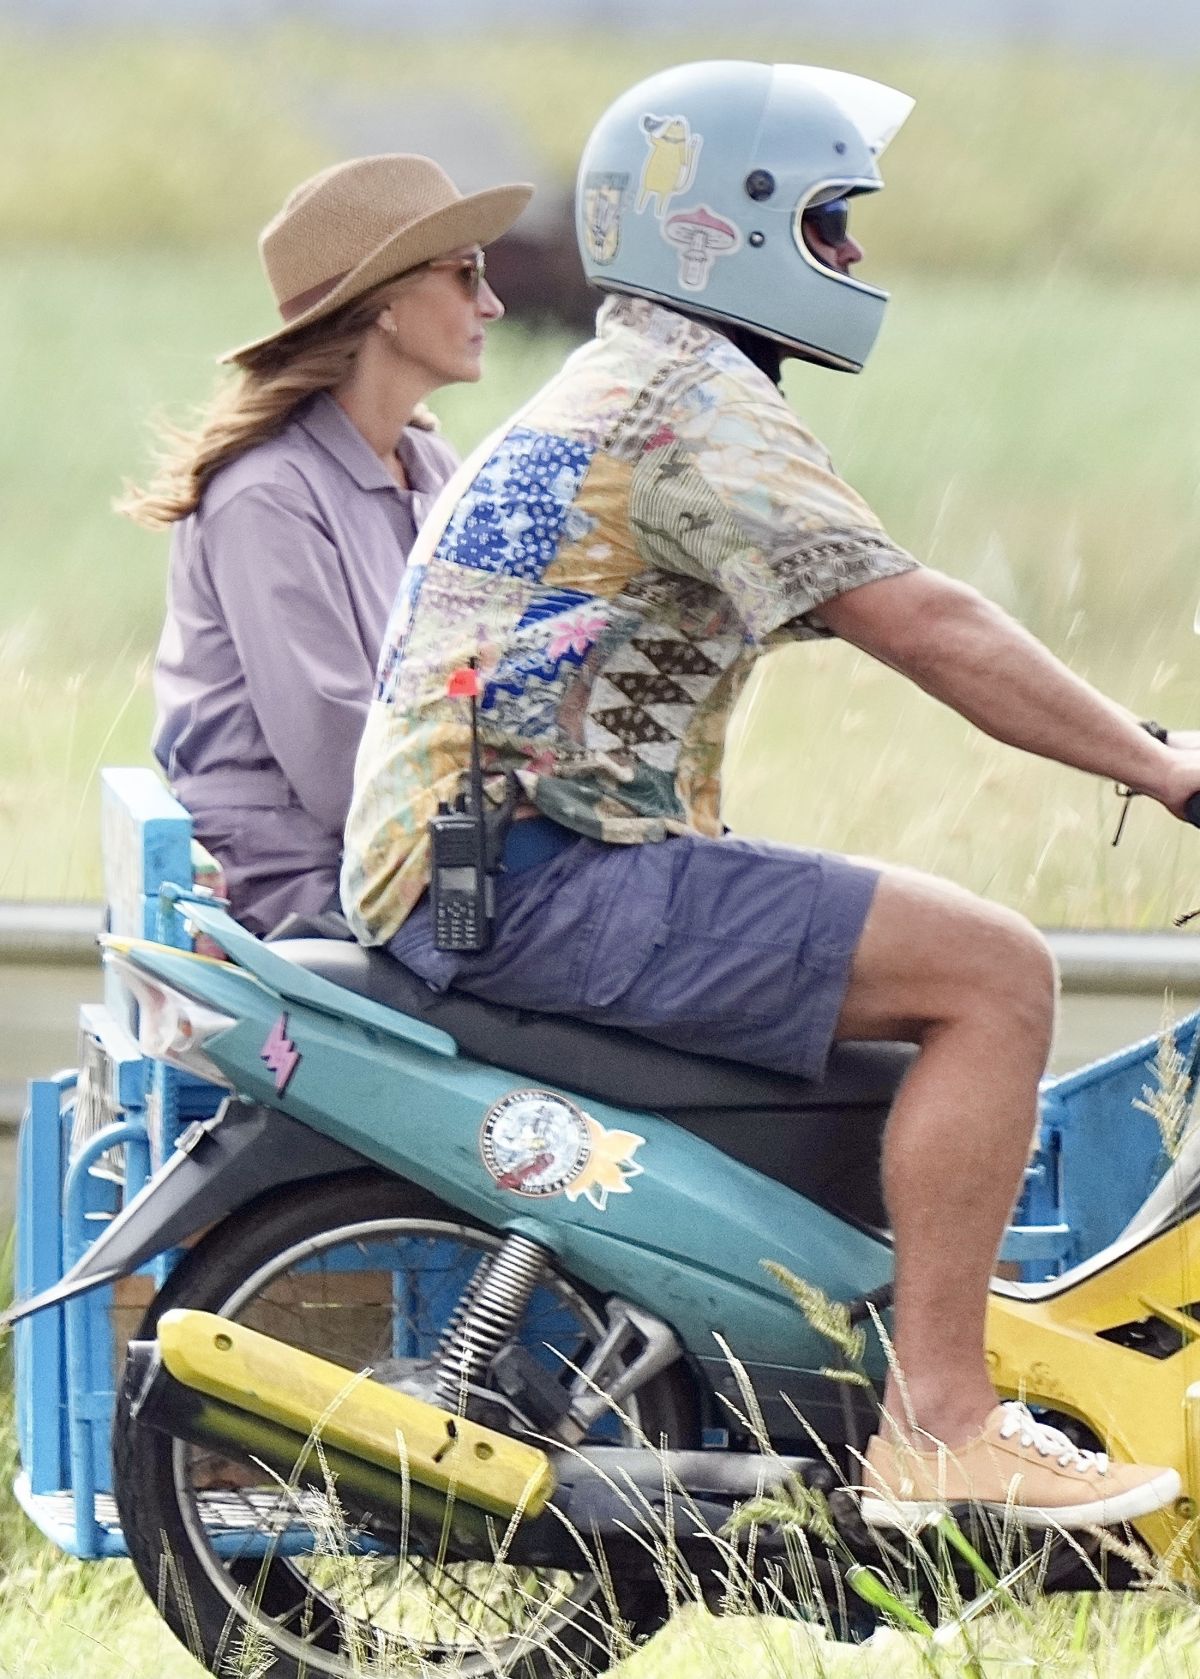 JULIA ROBERTS on the Set of Her Latest Movie Ticket to Paradise on Gold